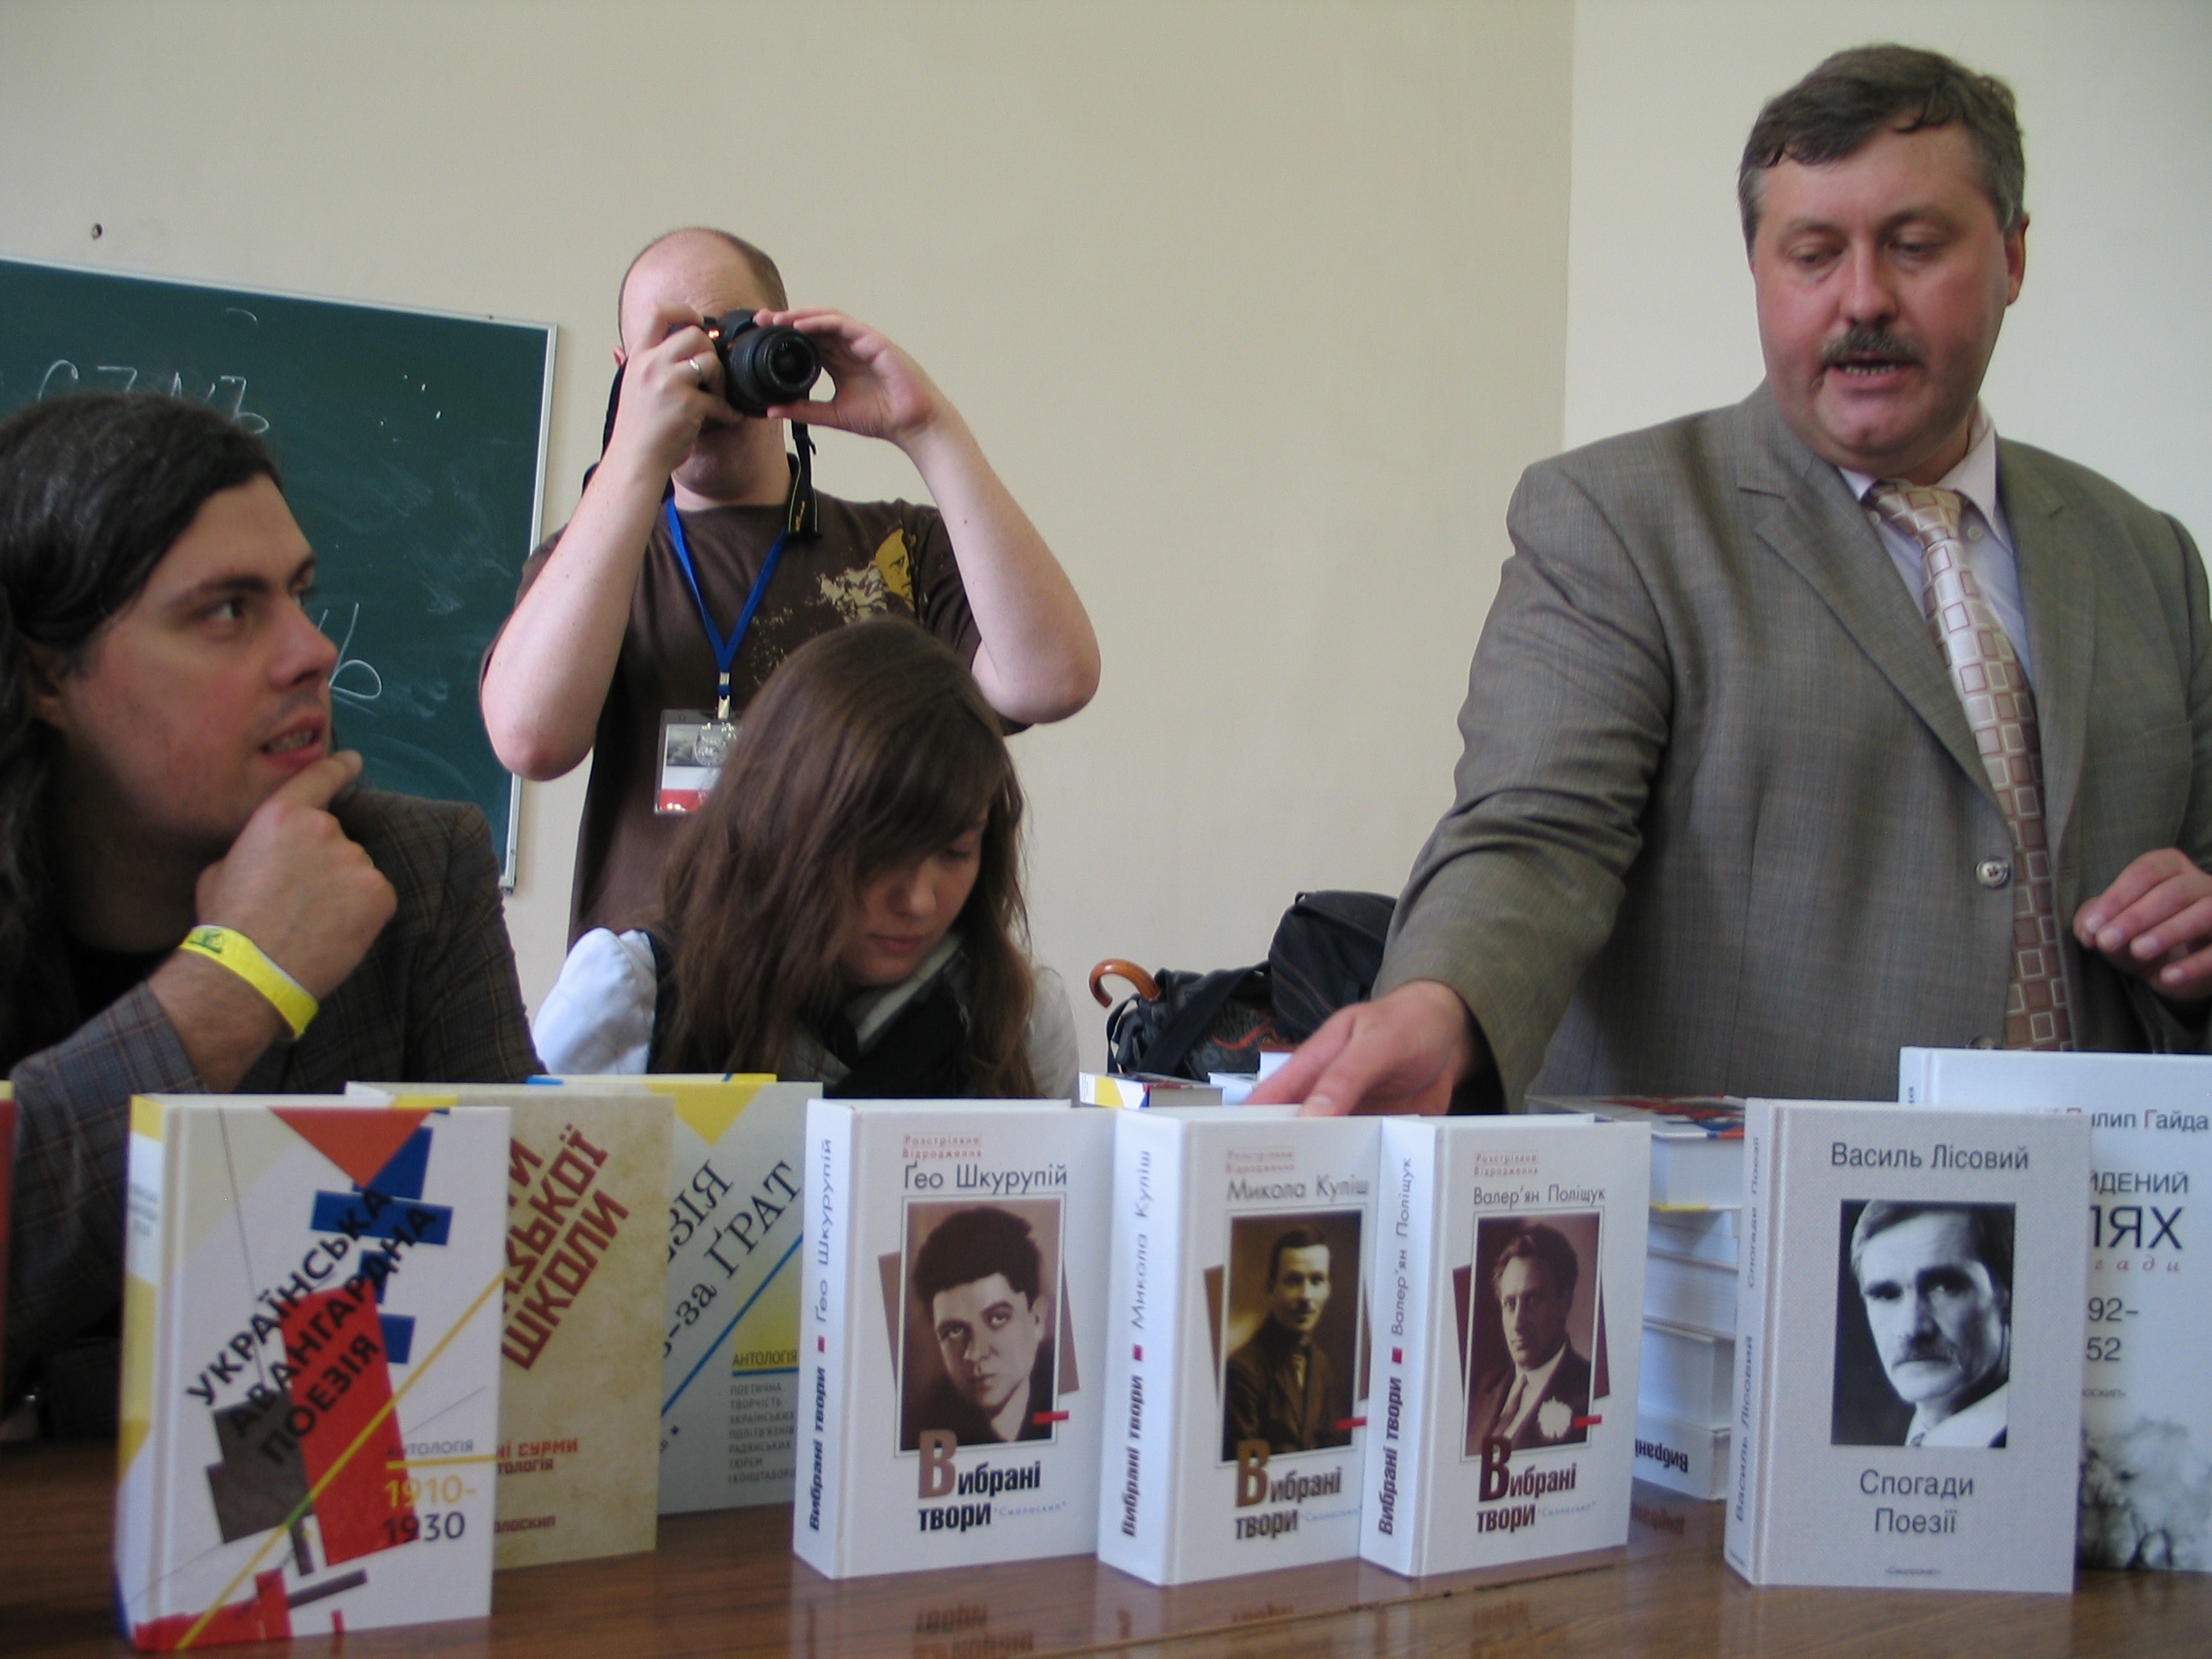 Smoloskyp Publishing House presentation at Lviv University during Publishers' Forum. Rostyslav Semkiv, the director, is speaking. Next to him (from right to left) are Yulia Stakhivska and Oleh Kotsarev, the poets and compilers of the anthology of Ukrainian avantgarde poetry